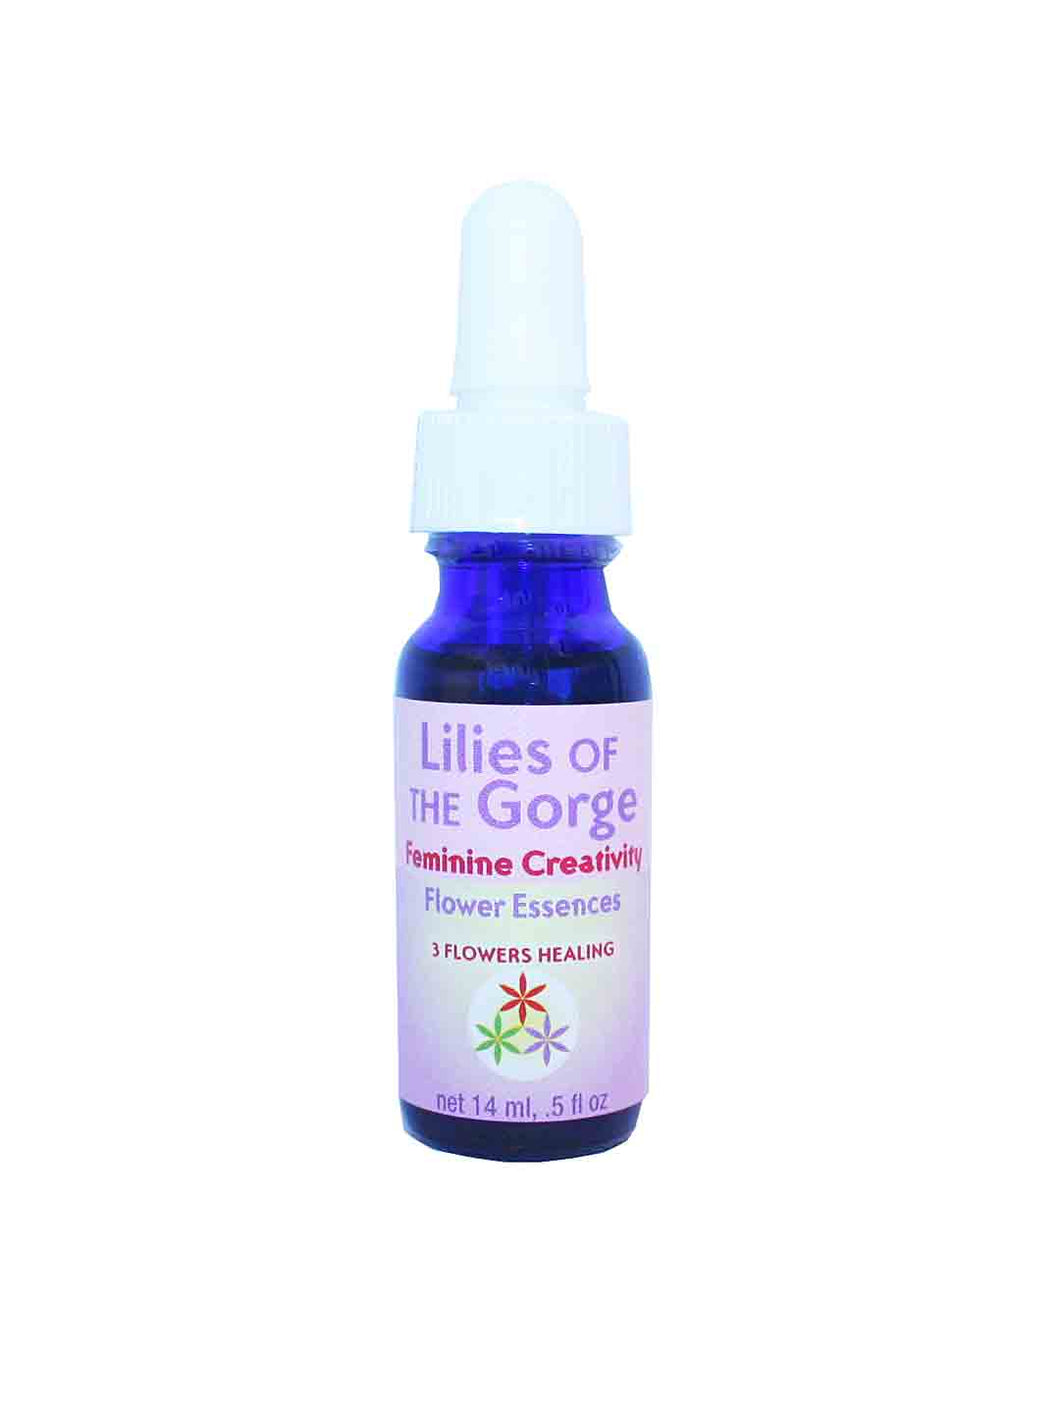 Lilies of The Gorge Flower Essence Formula